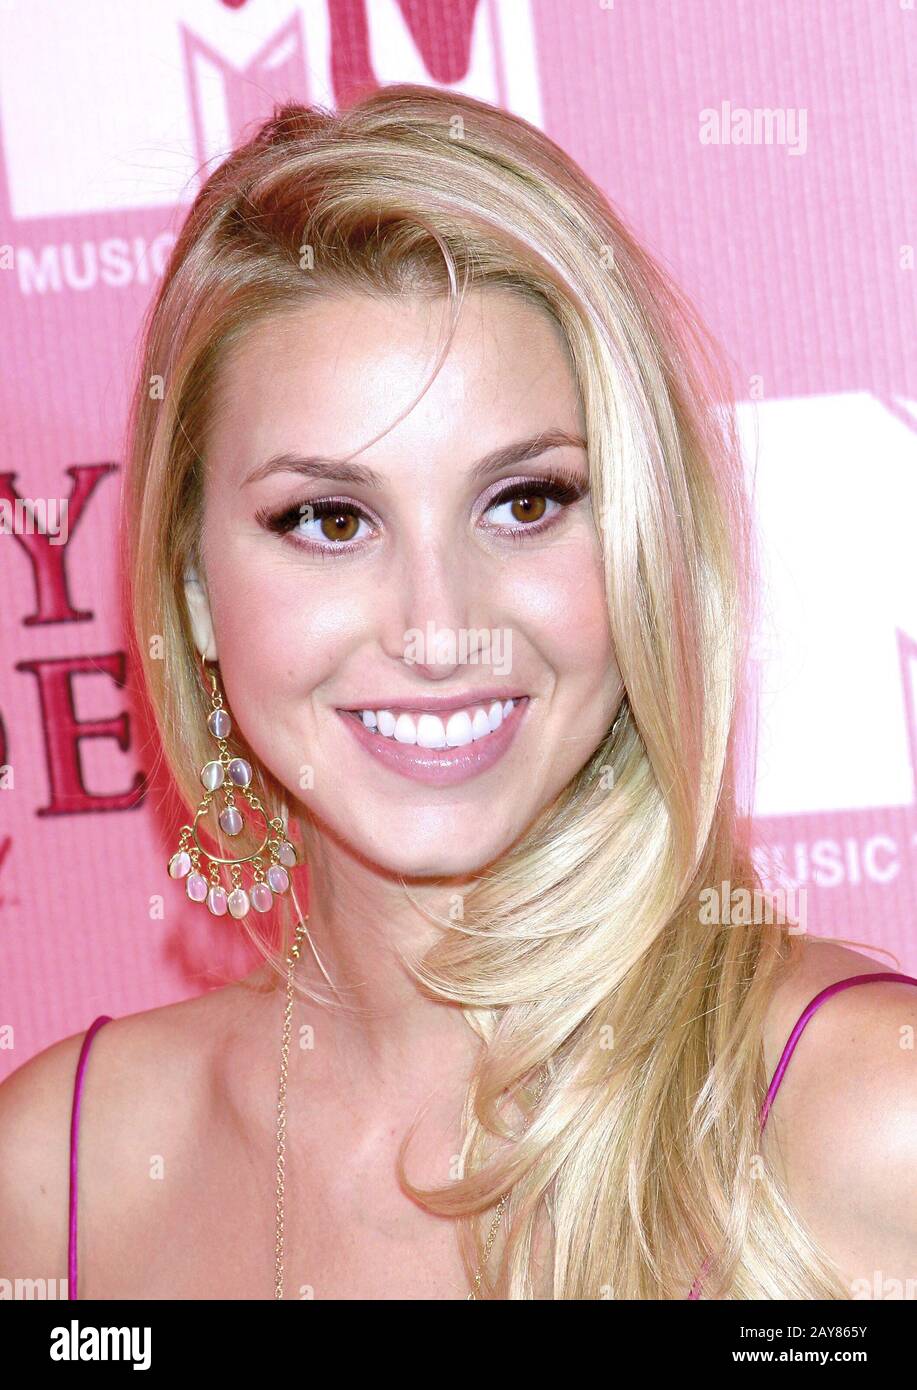 New York, NY, USA. 18 September, 2007. Whitney Port at the taping of Legally Blonde The Musical at The Palace Theatre. Credit: Steve Mack/Alamy Stock Photo